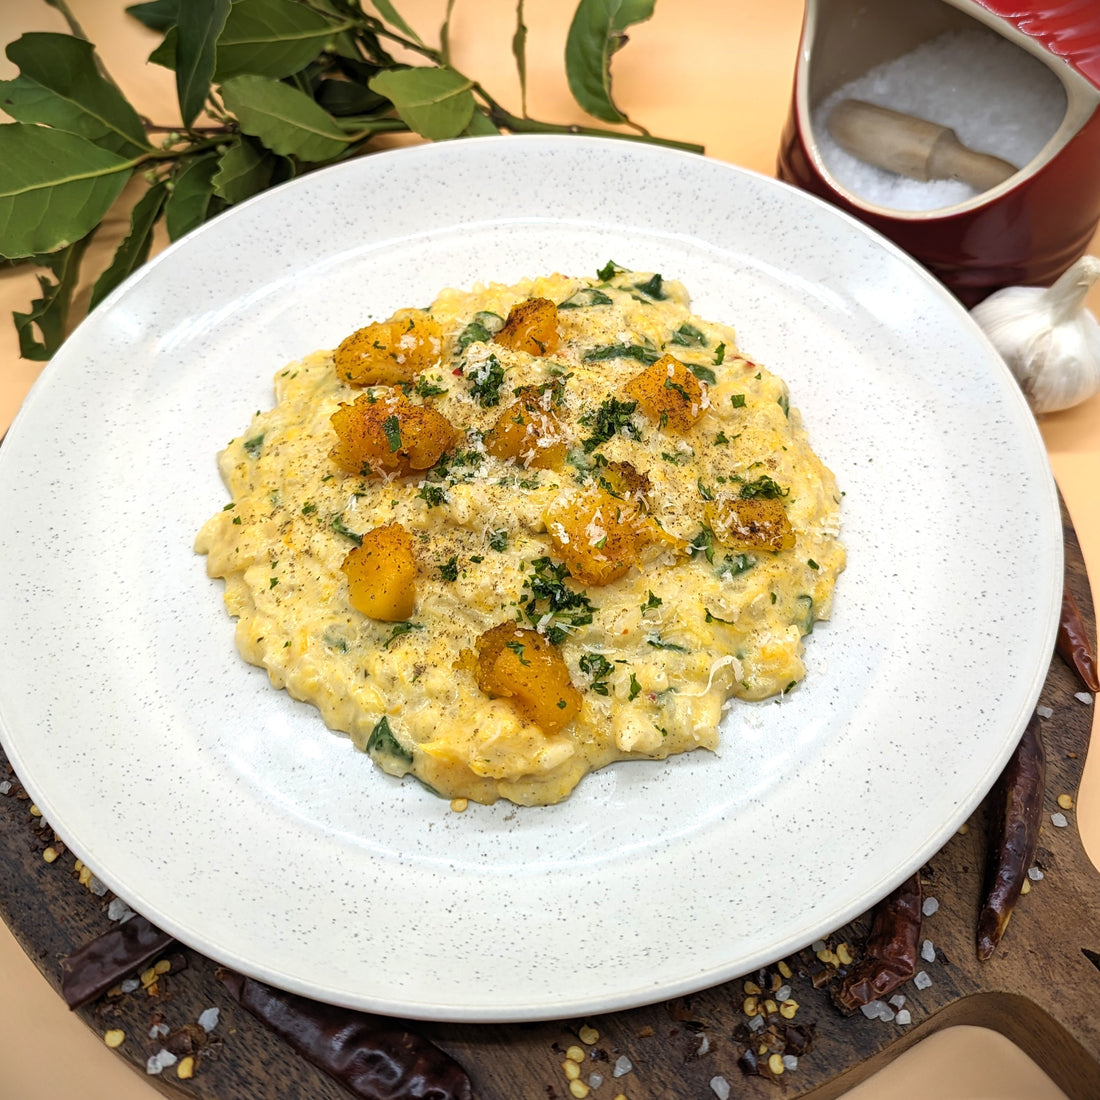 Indulge in Winter Comfort with Roasted Butternut Squash Risotto & Cobros Bone Broth